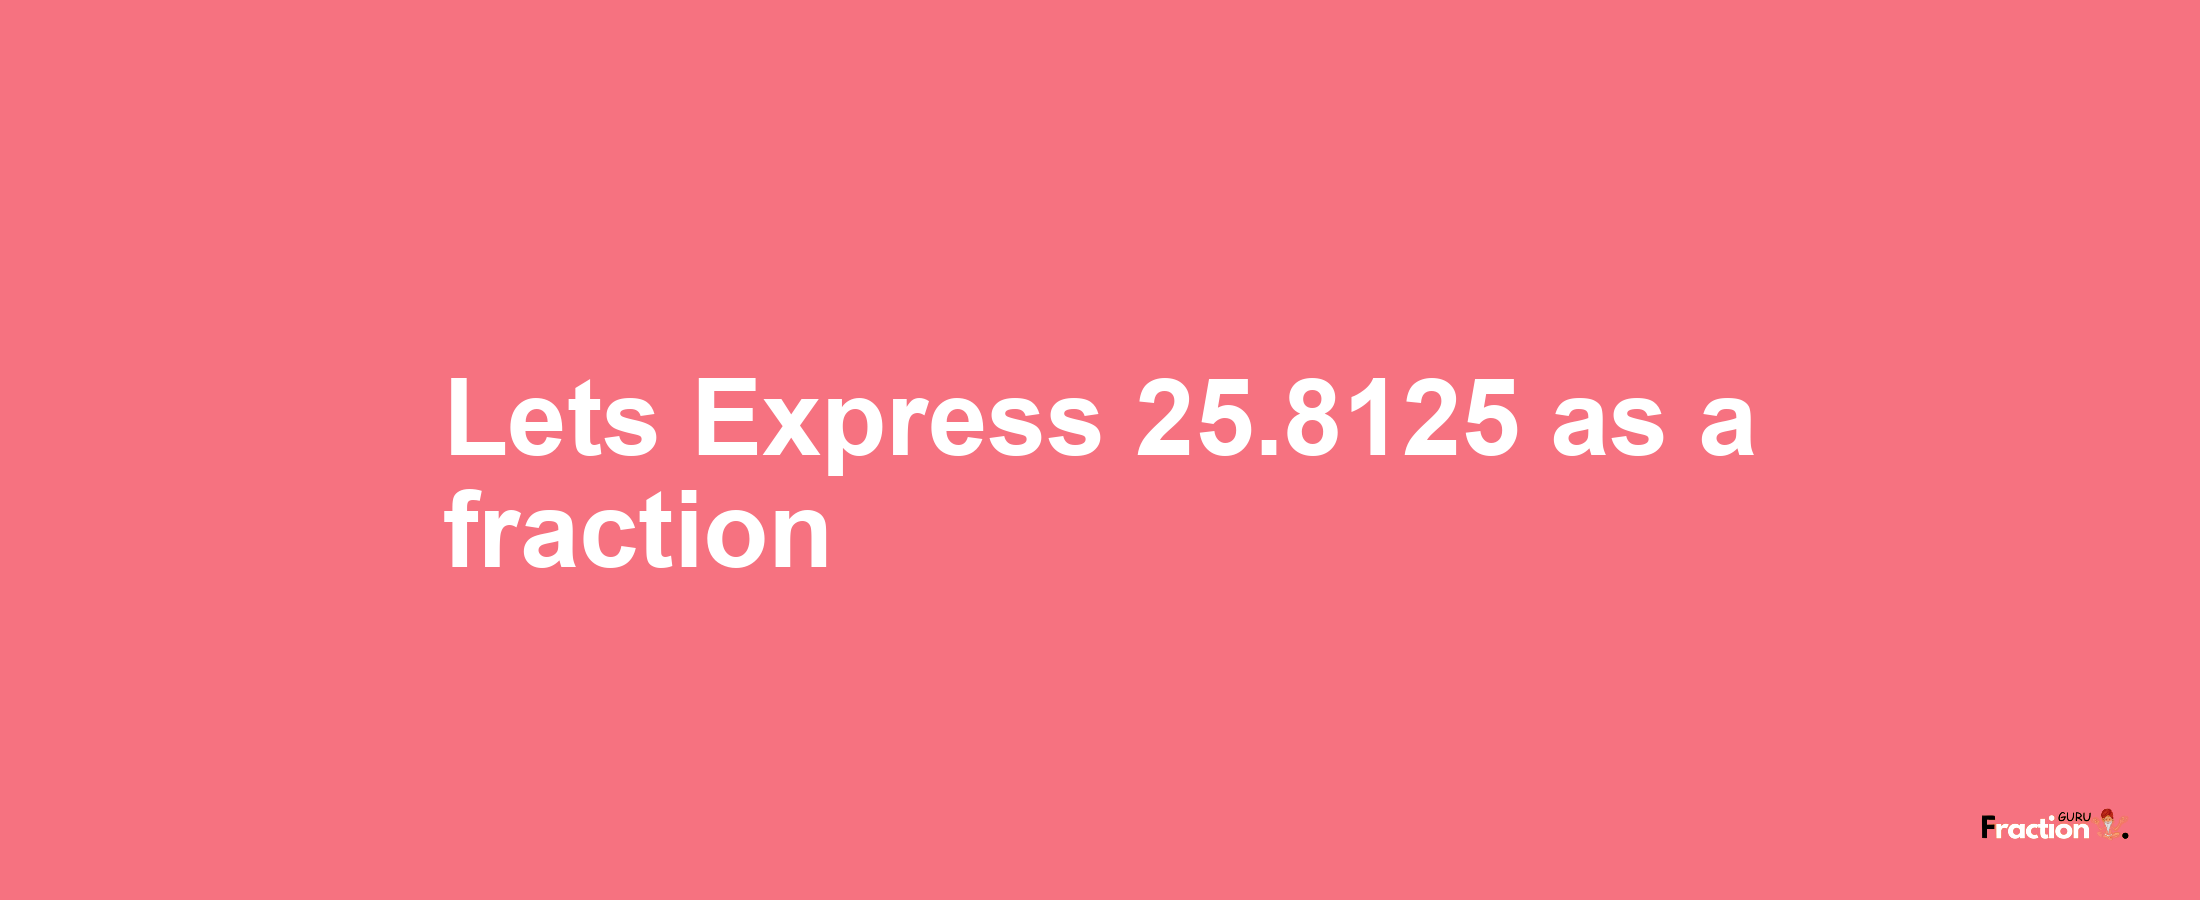 Lets Express 25.8125 as afraction